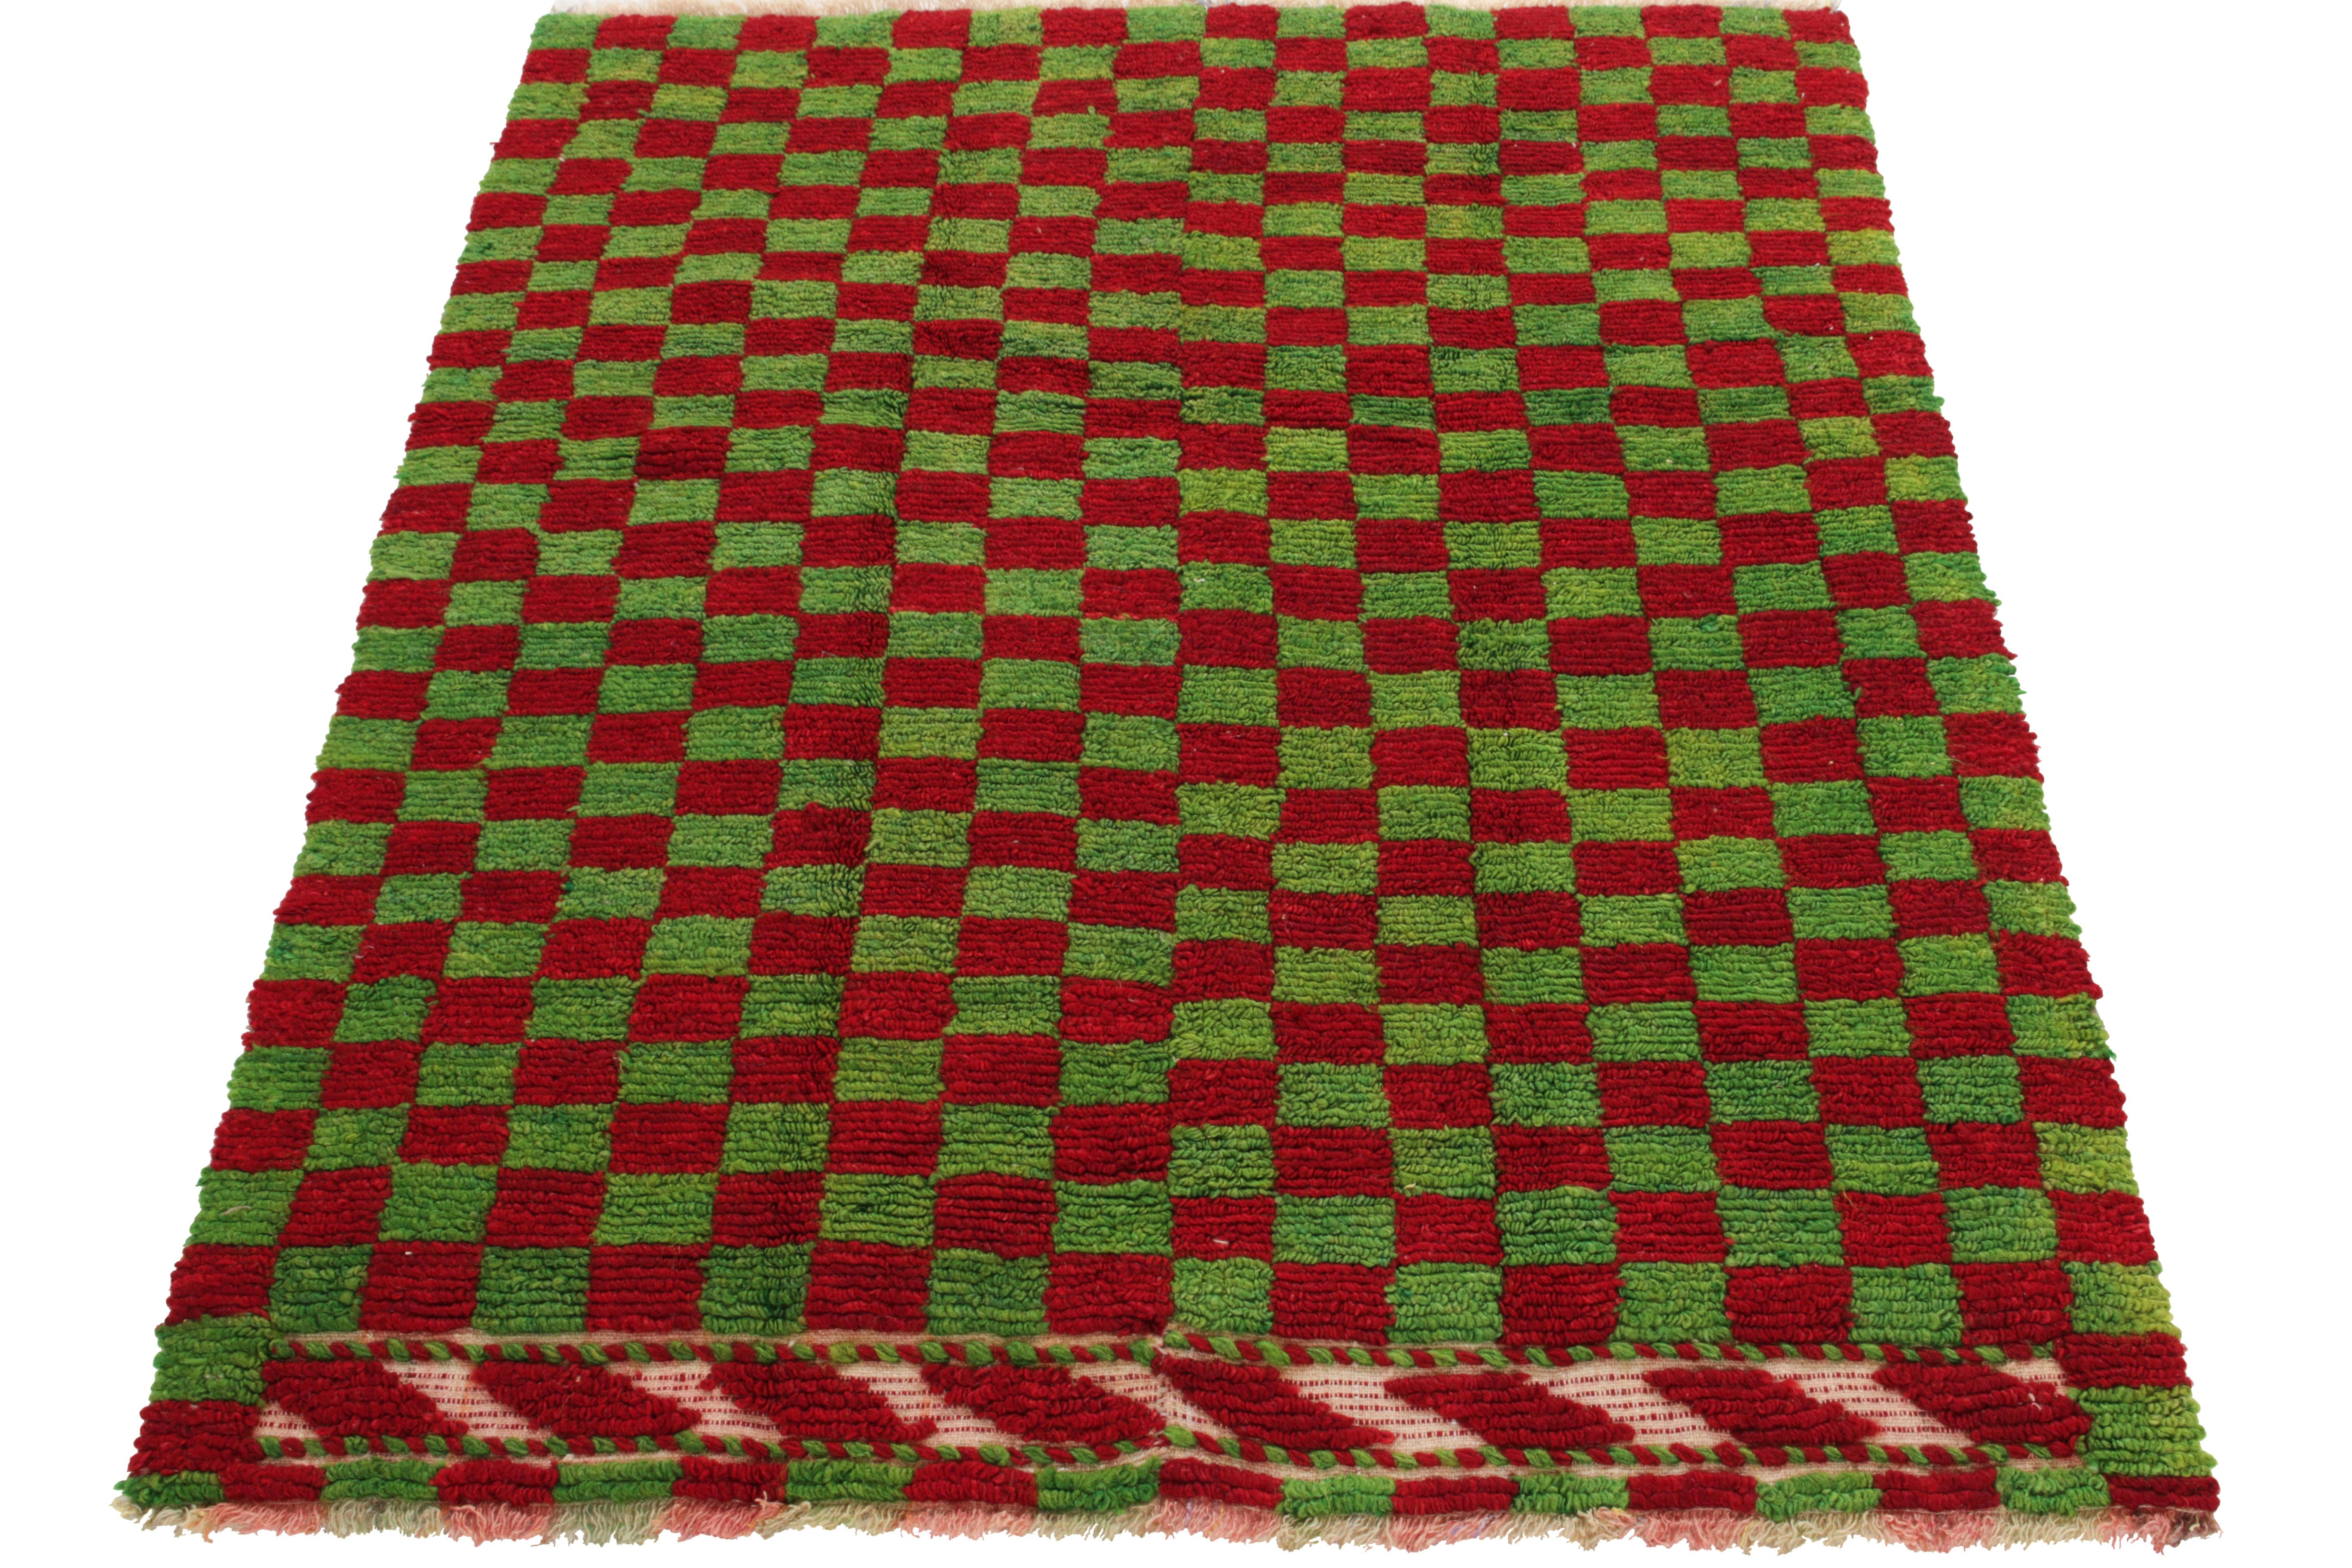 Hand-knotted in wool, a 4x5 vintage Tulu rug originating from Turkey circa 1950-1960, now joining Rug & Kilim’s Antique & Vintage collection. The healthy loop pile features a well defined checkered pattern in parrot green & scarlet red for an